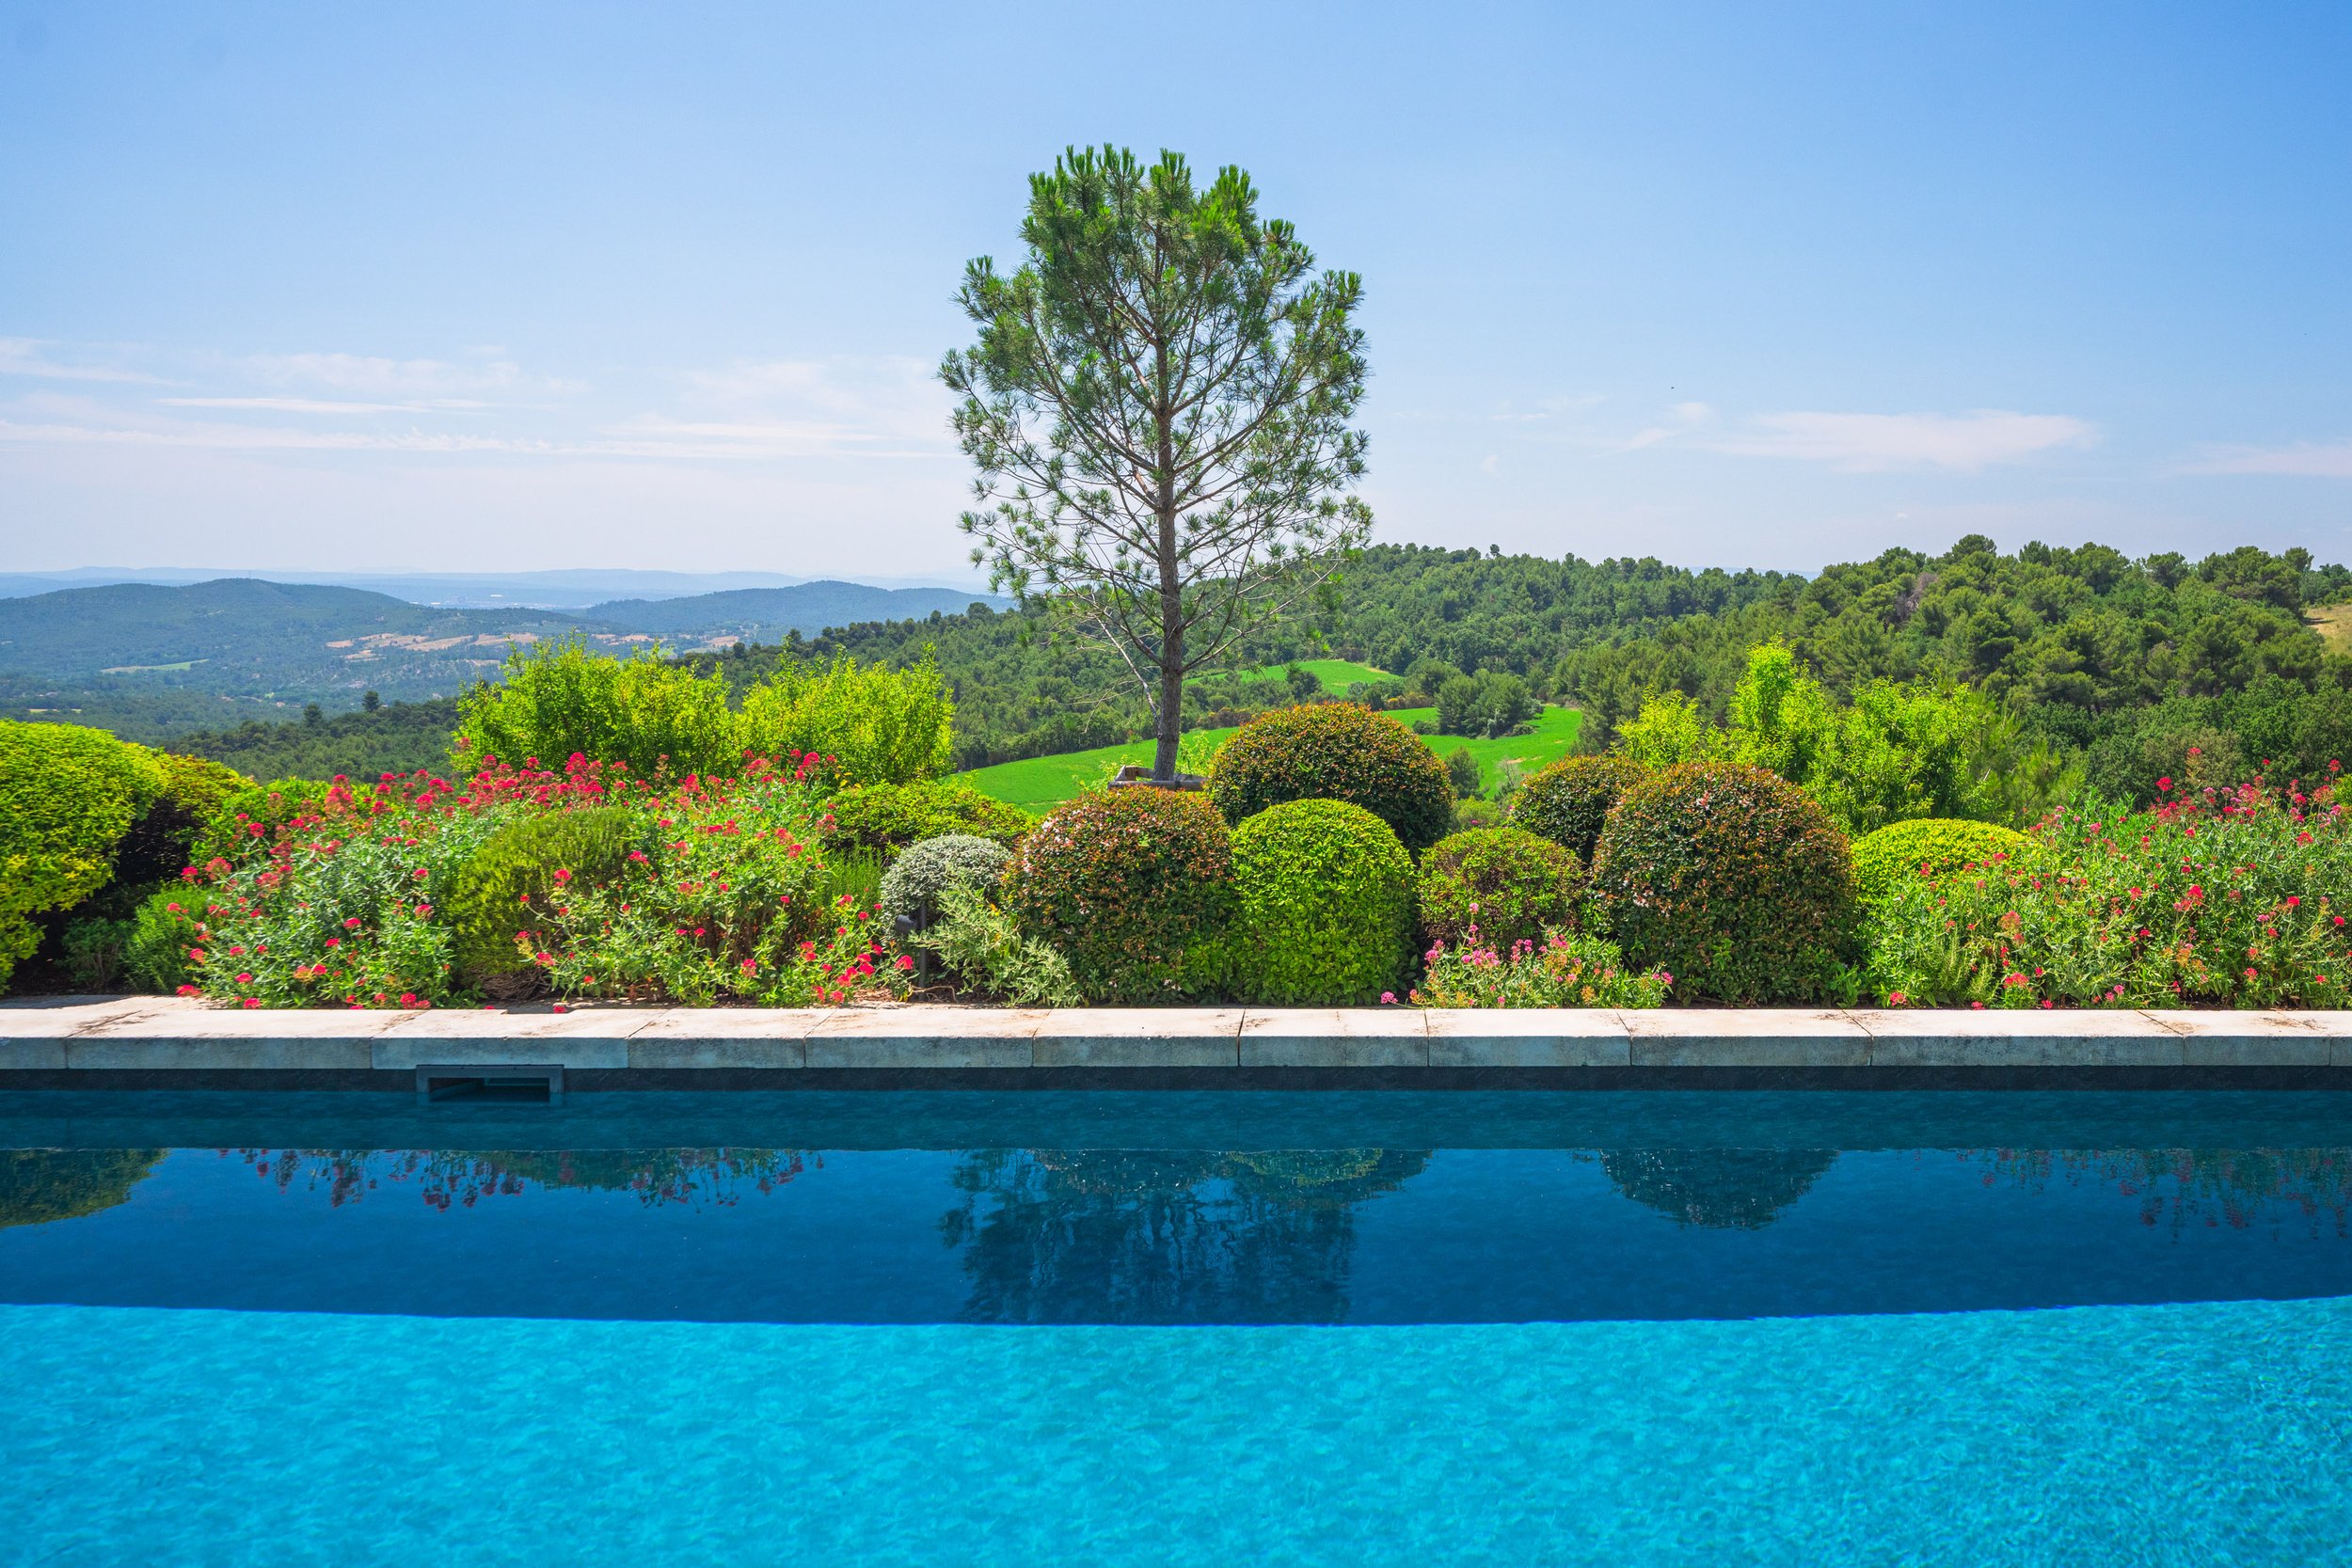 Francis+York+French Country Estate in the South Luberon 00007.jpg